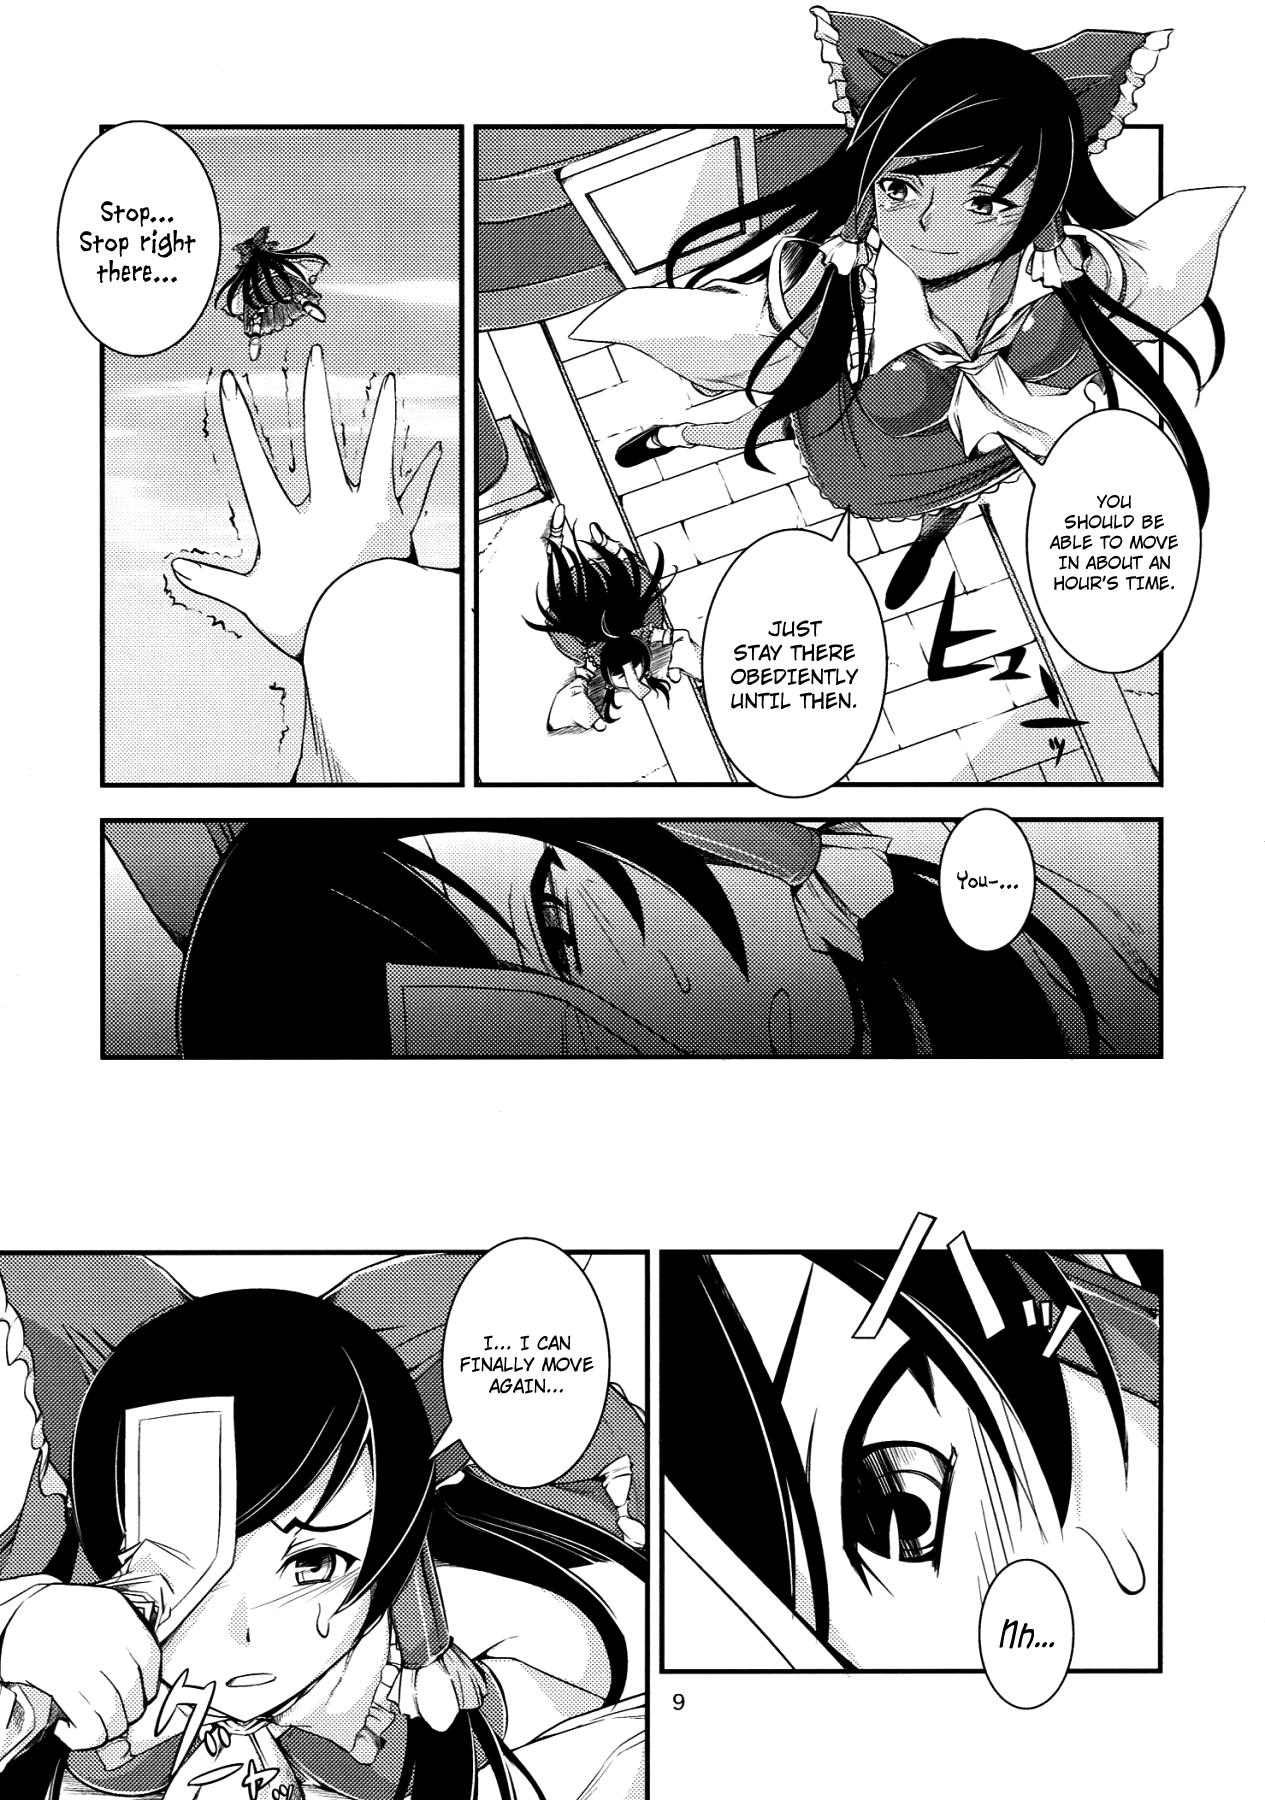 Negra The Incident of the Black Shrine Maiden - Touhou project Bigbutt - Page 8